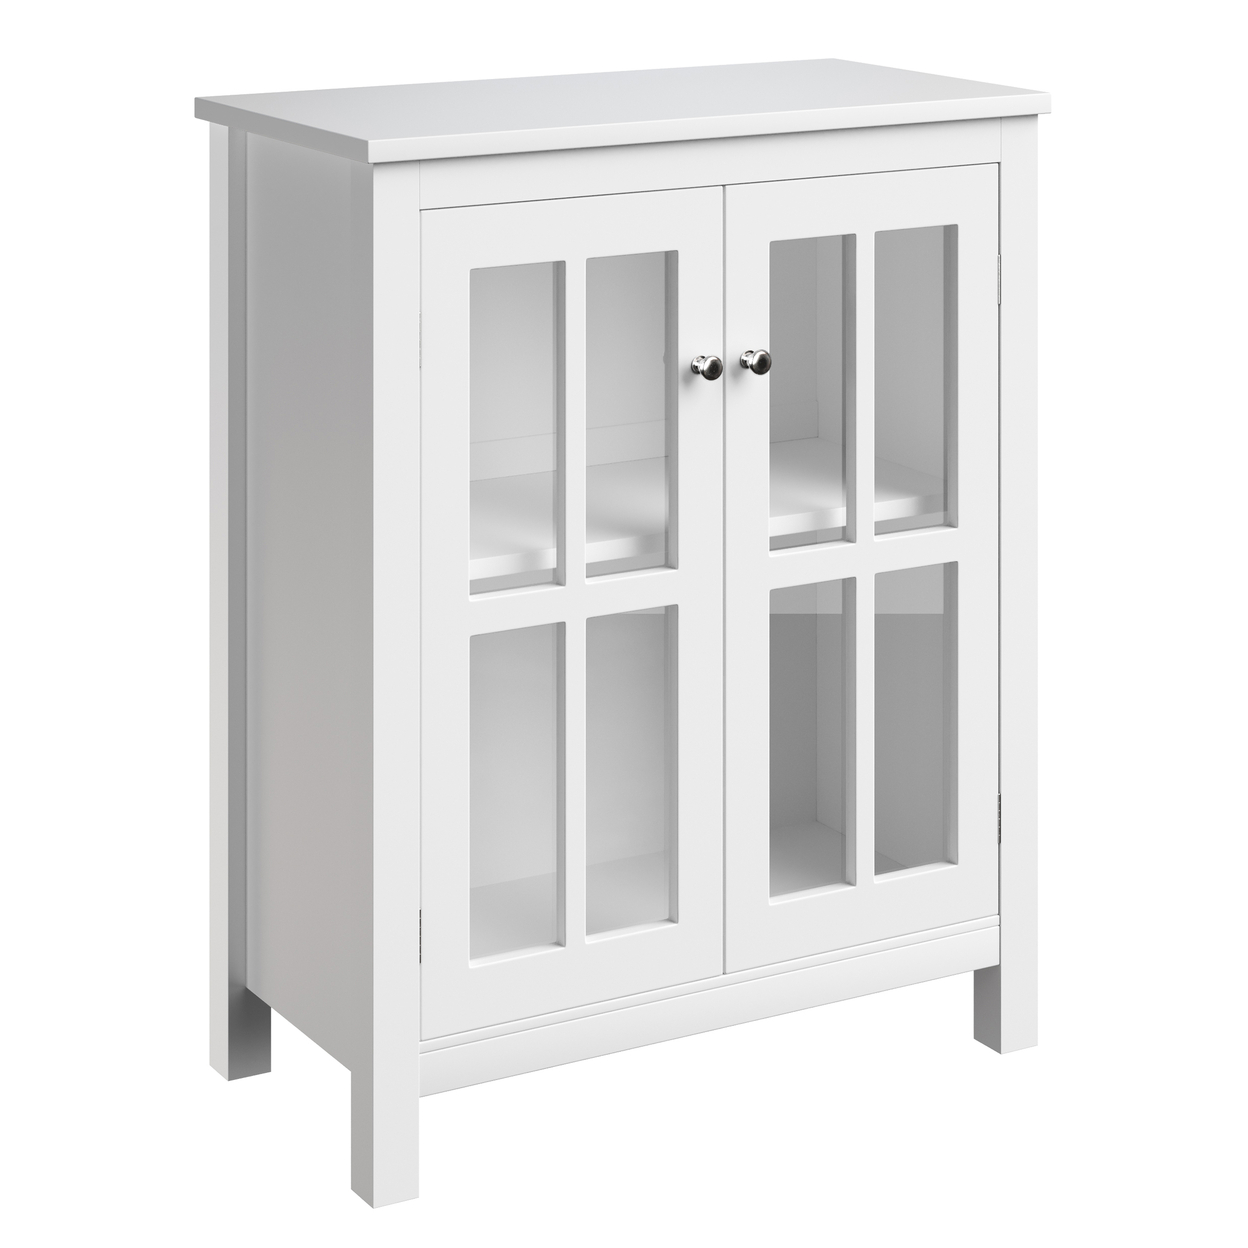 Buffet Cabinet Sideboard Table With Interior Shelf Glass Display Doors, White